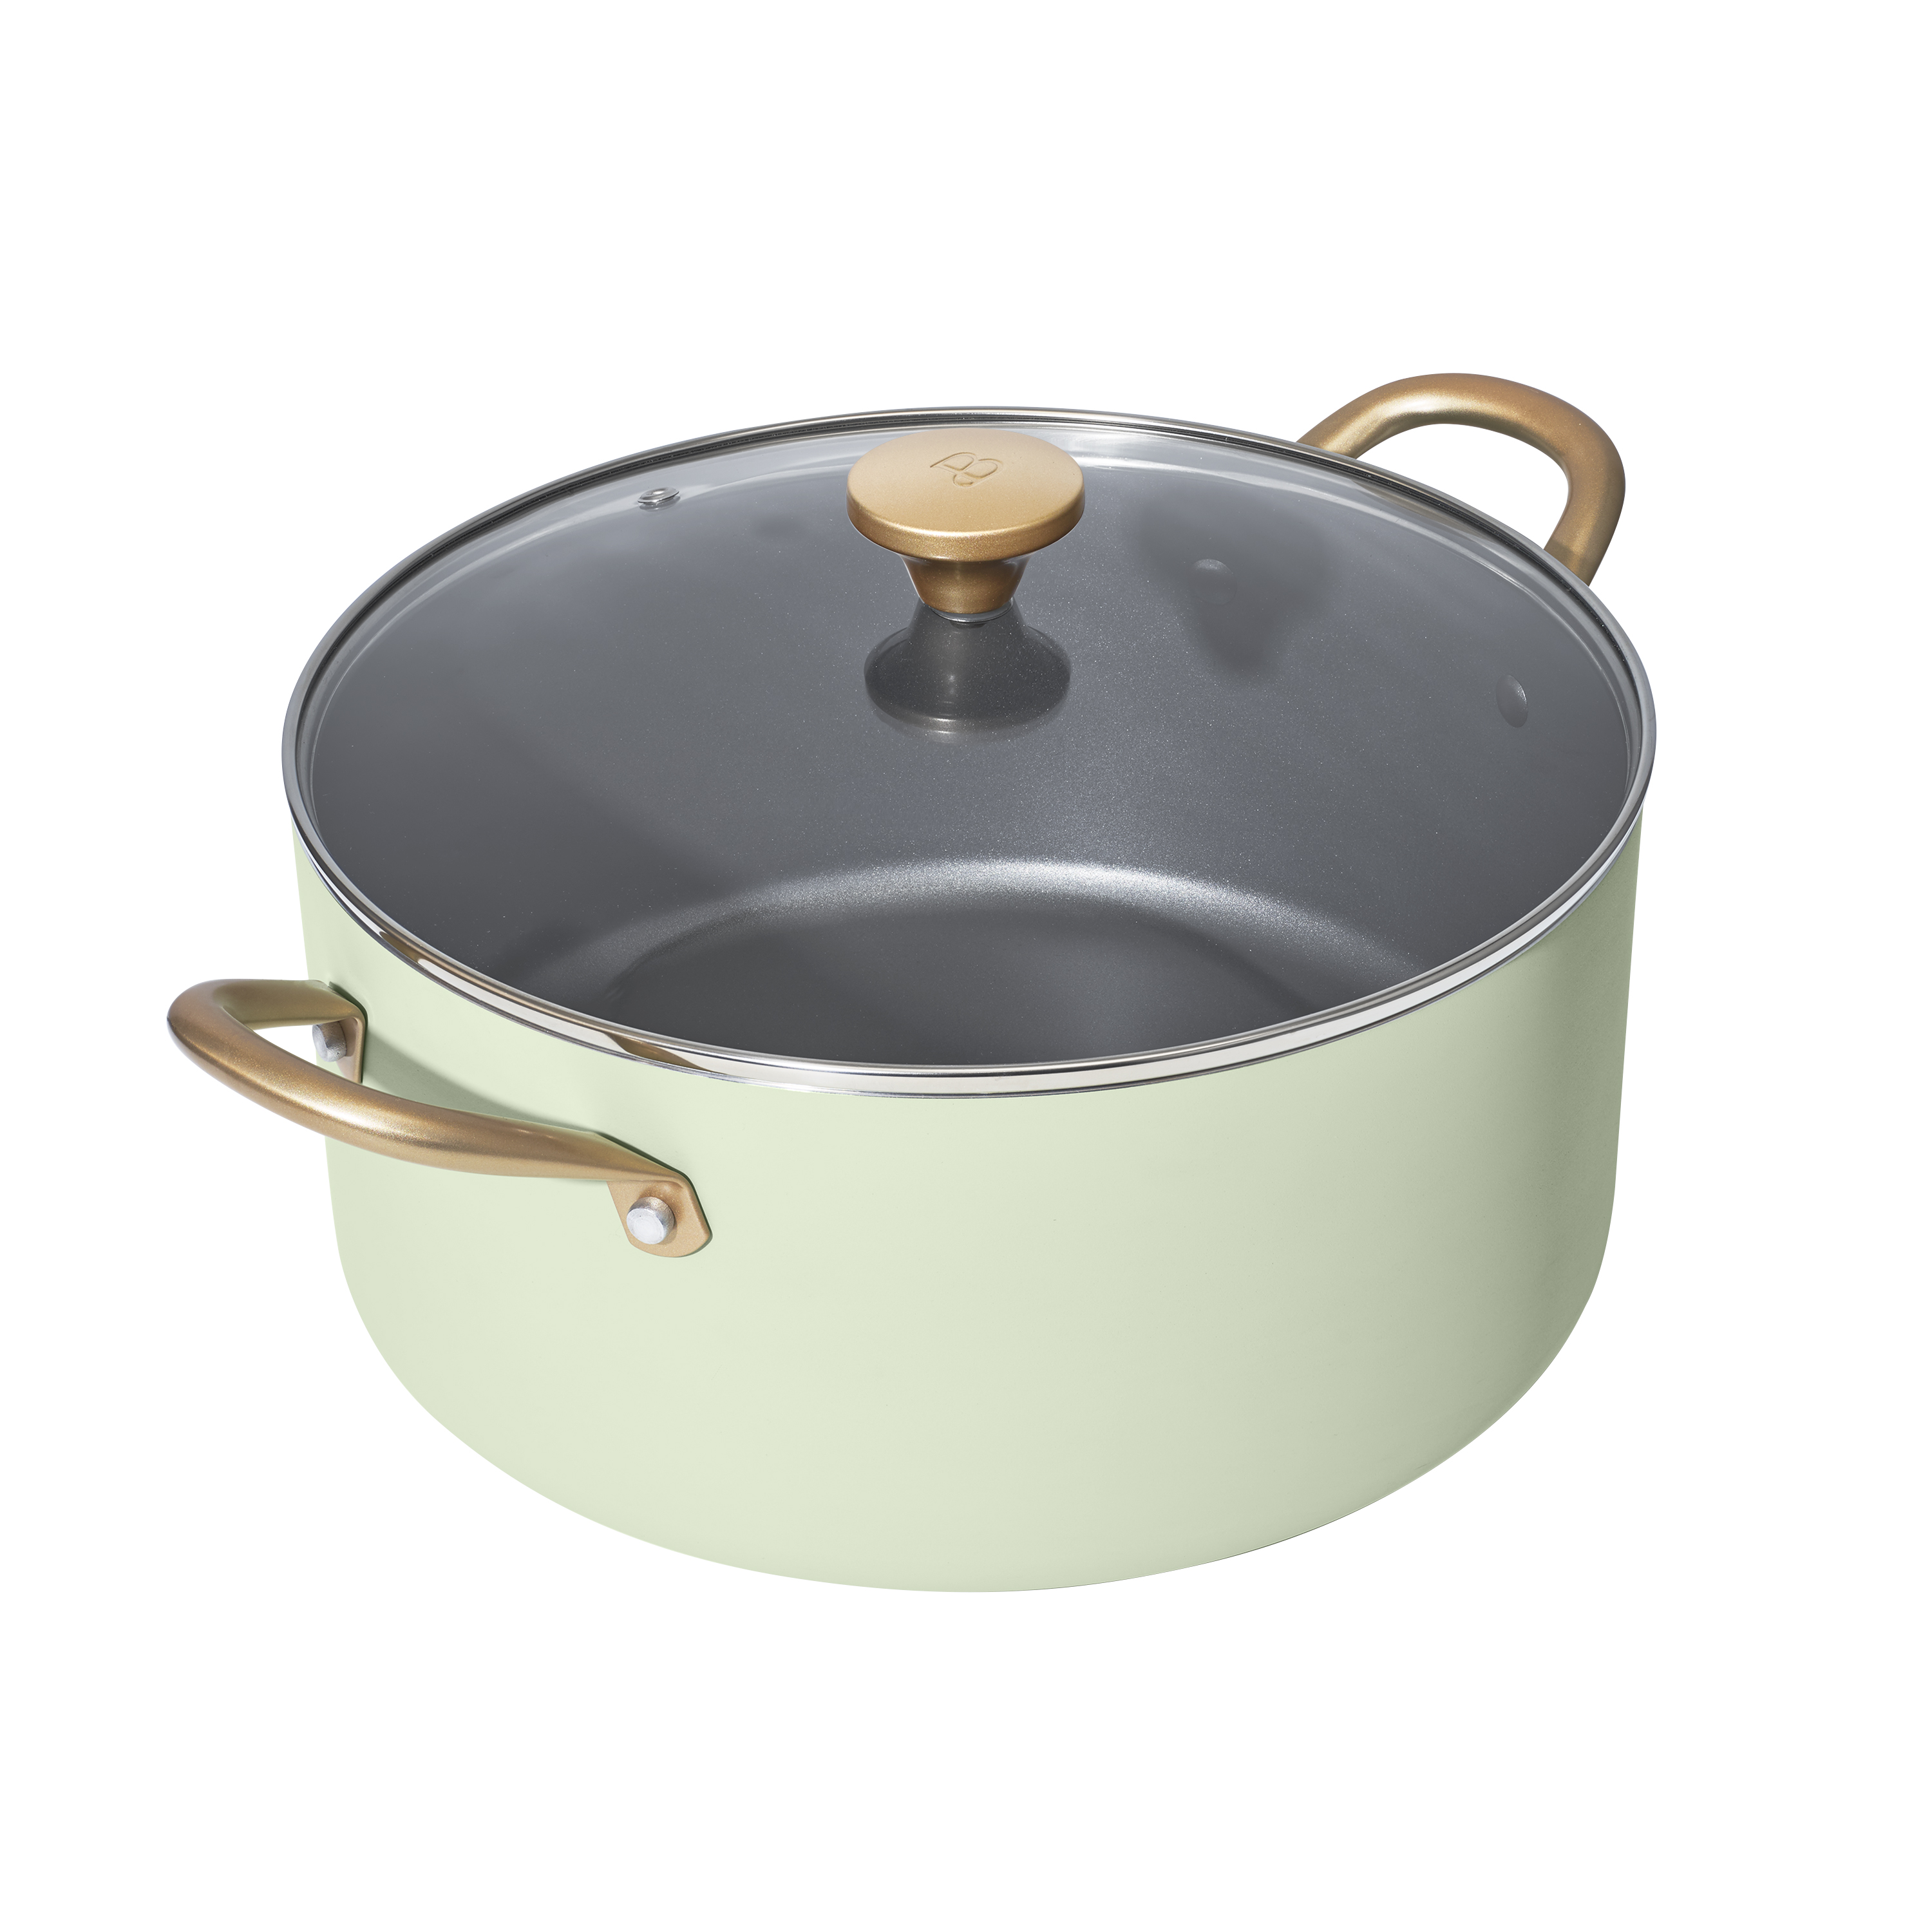 Beautiful 11"/8QT One Pot, Sage Green by Drew Barrymore - image 1 of 8